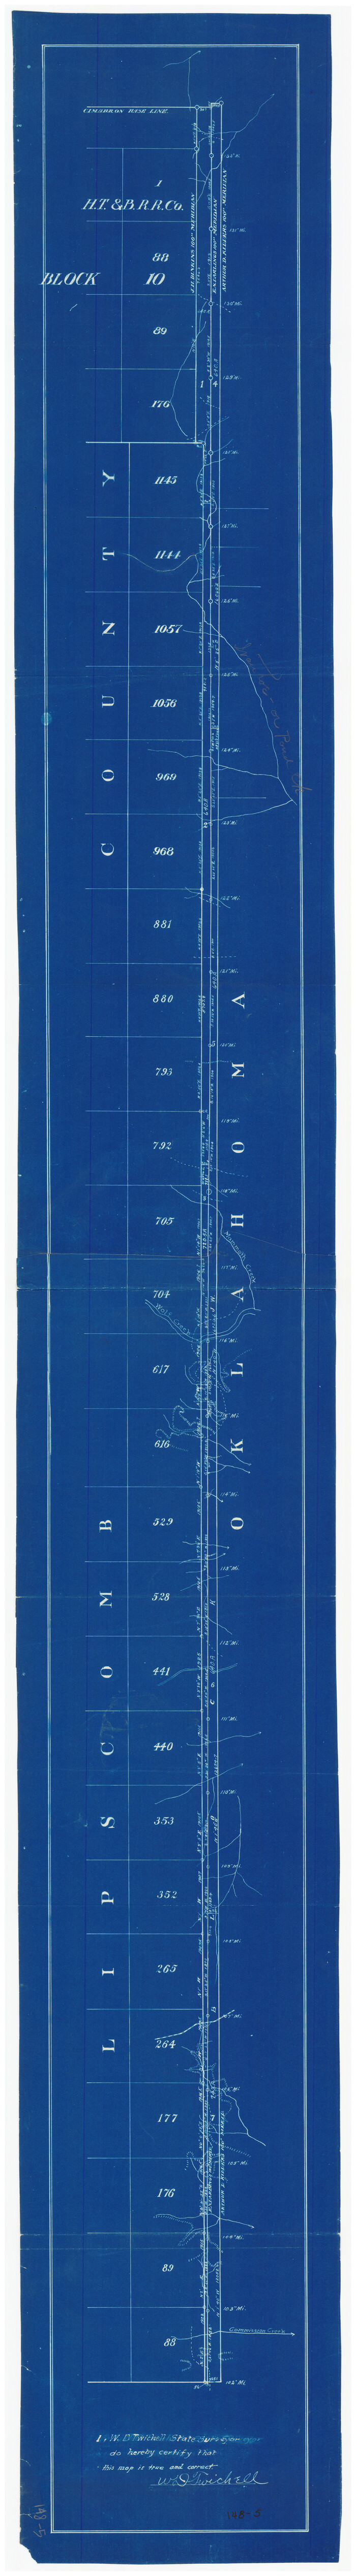 89968, [Sketch showing details along East line of Lipscomb County], Twichell Survey Records